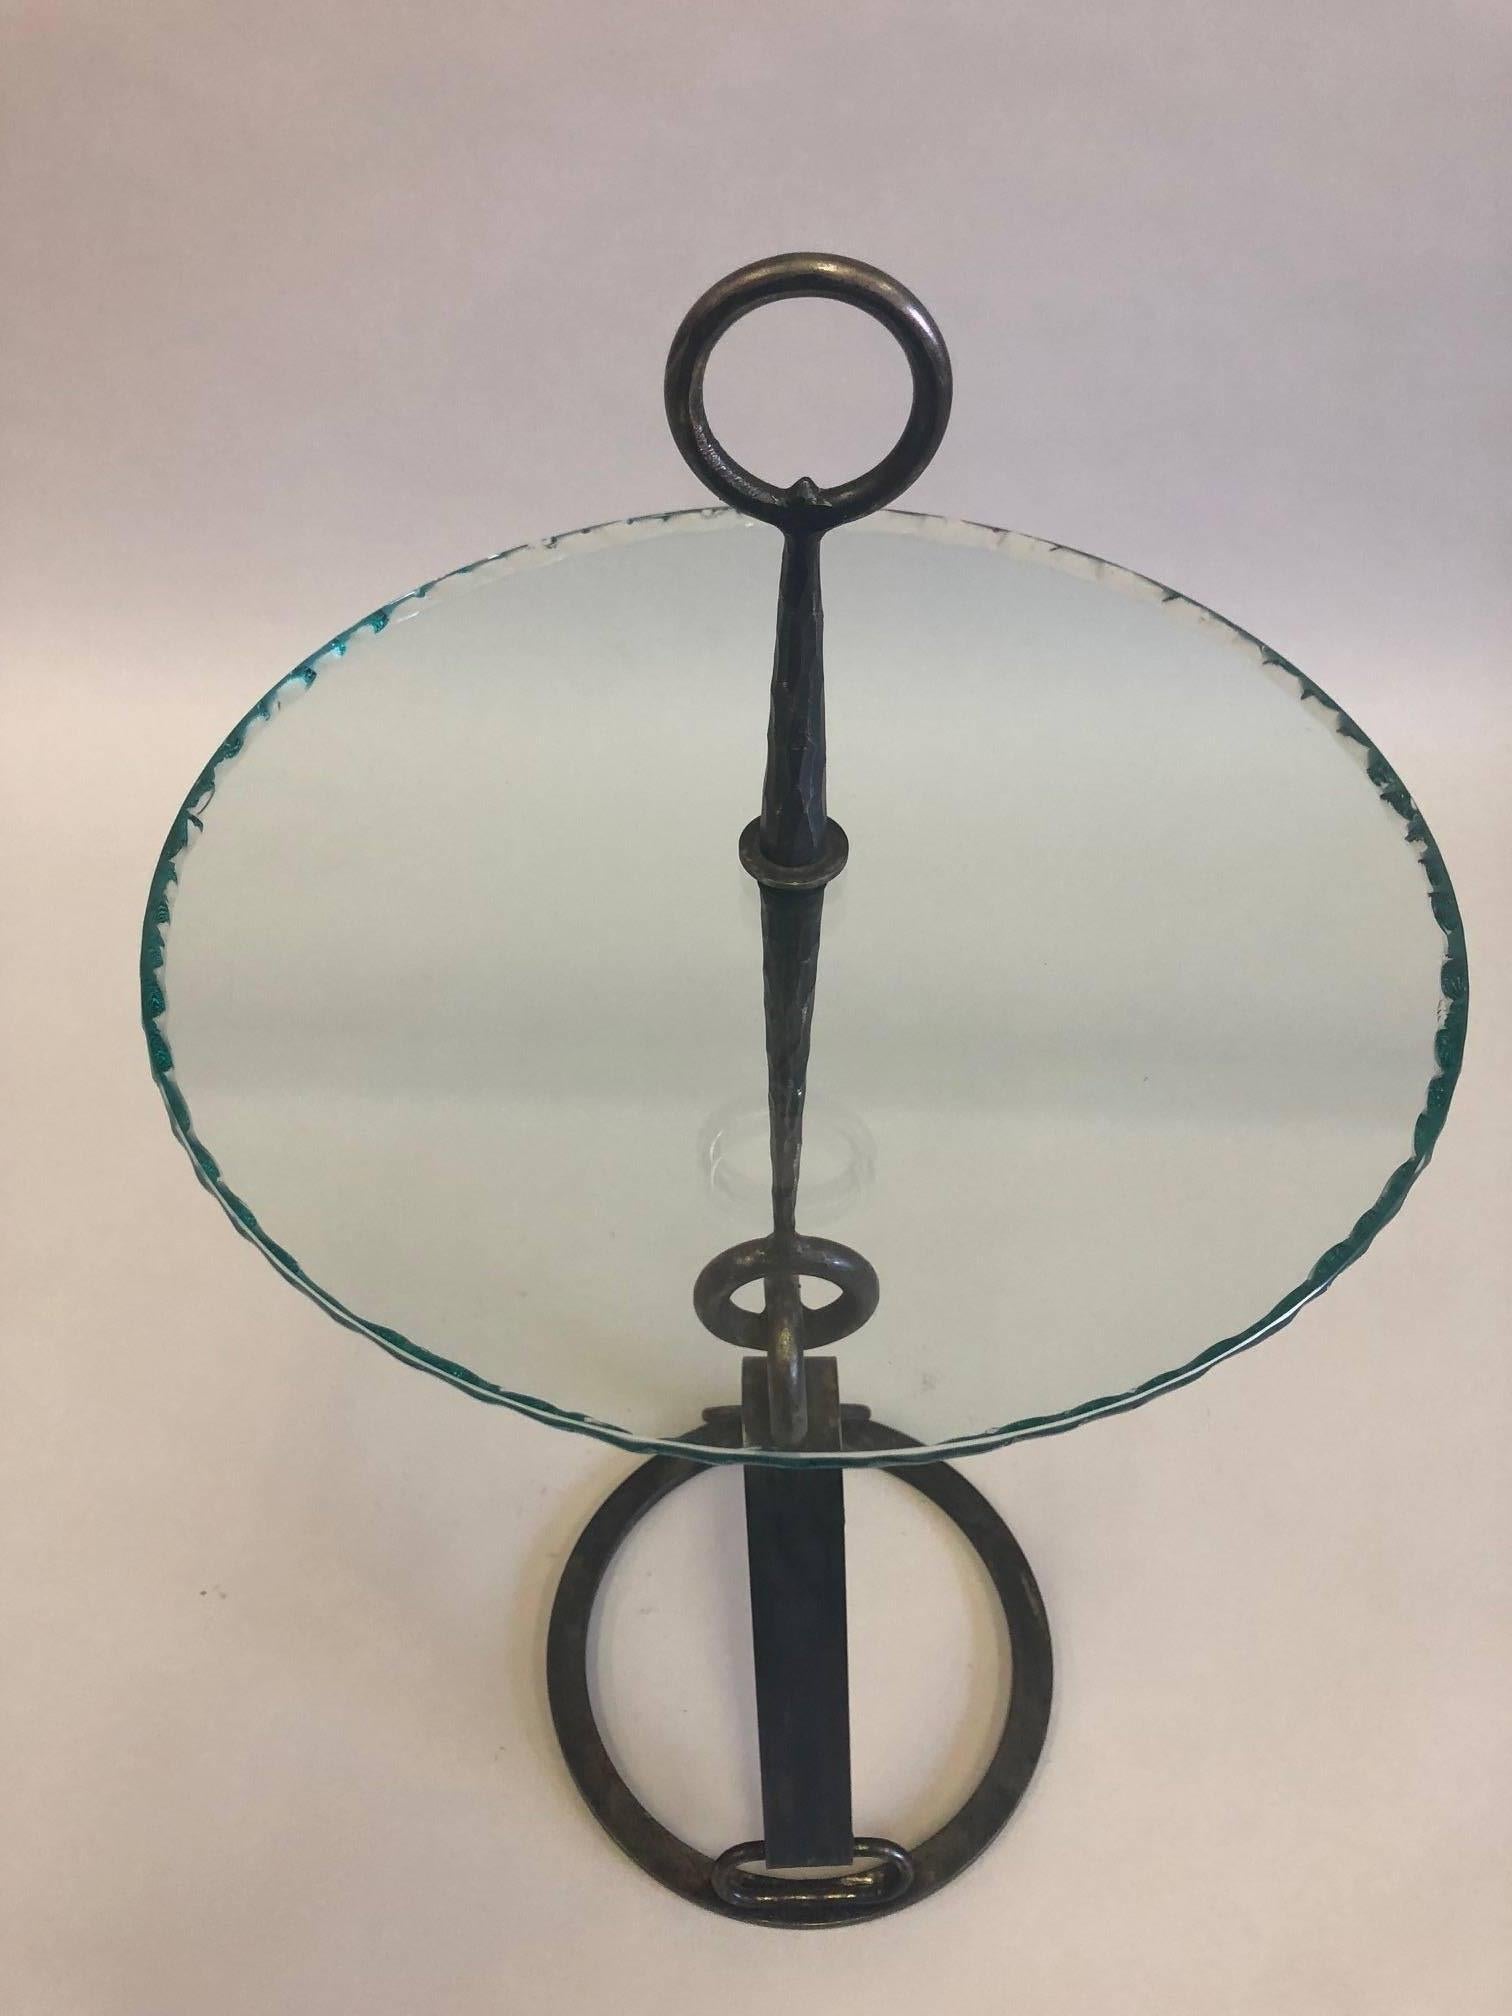 Pair Custom Italian Modern Neoclassical Wrought Iron Side Tables, Hermes style In Excellent Condition For Sale In New York, NY